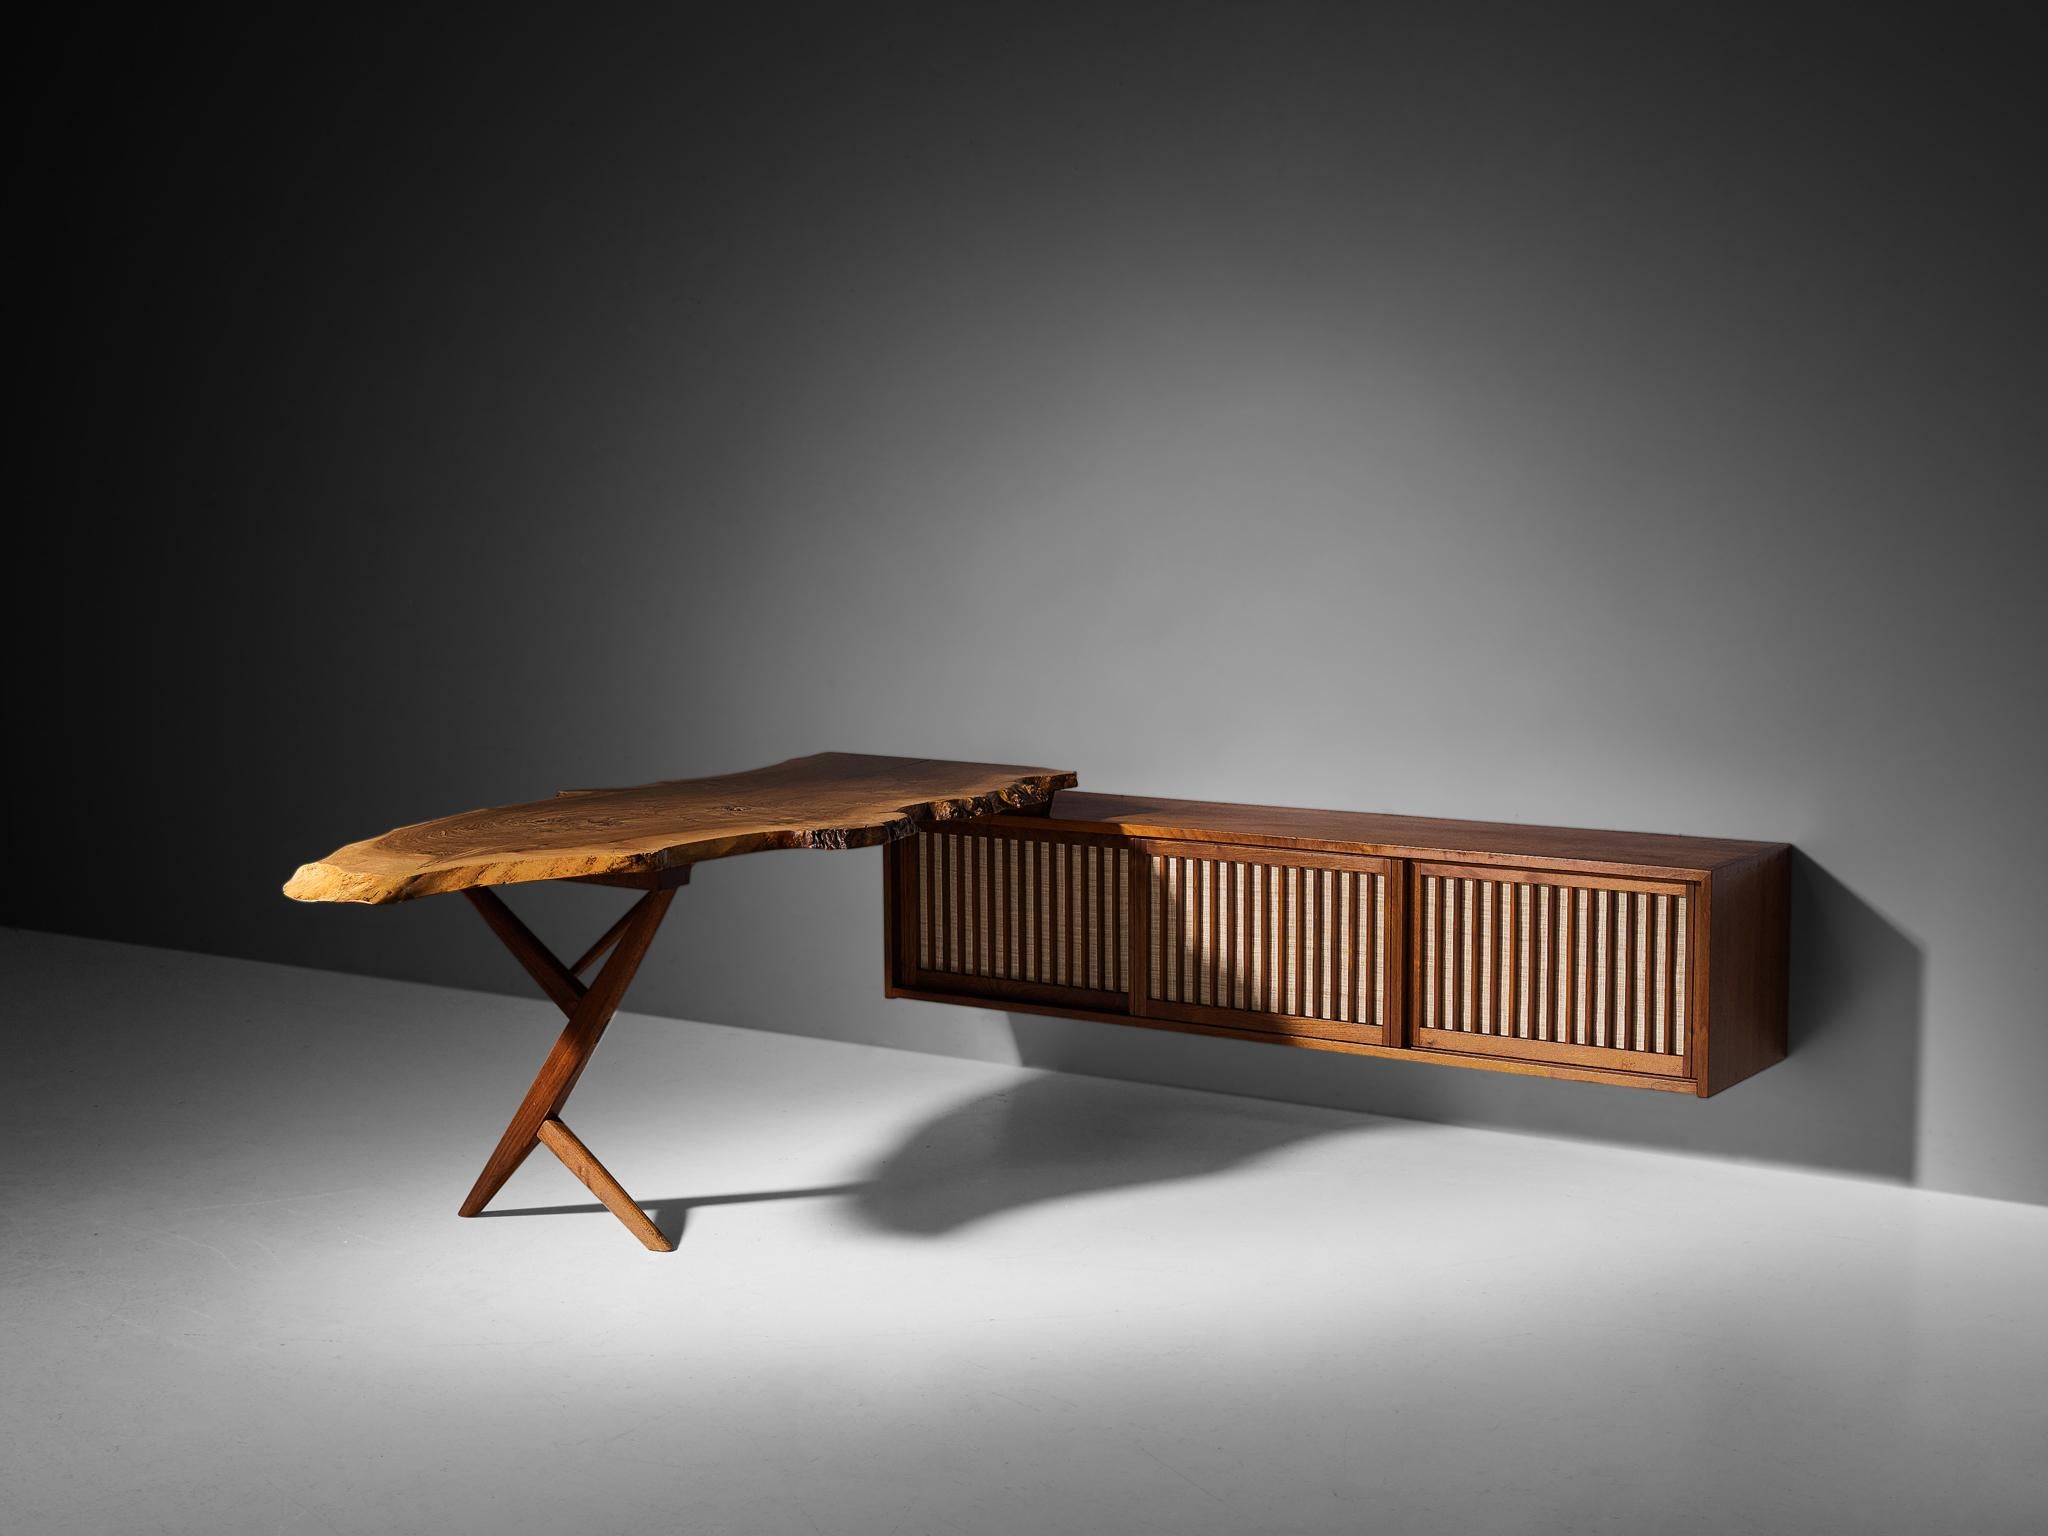 George Nakashima, desk with sliding-door wall-mounted cabinet, American black walnut, English walnut, pandanus cloth, United States, 1960

With regard to its essential form, material use, and woodwork, this unique combination of desk with